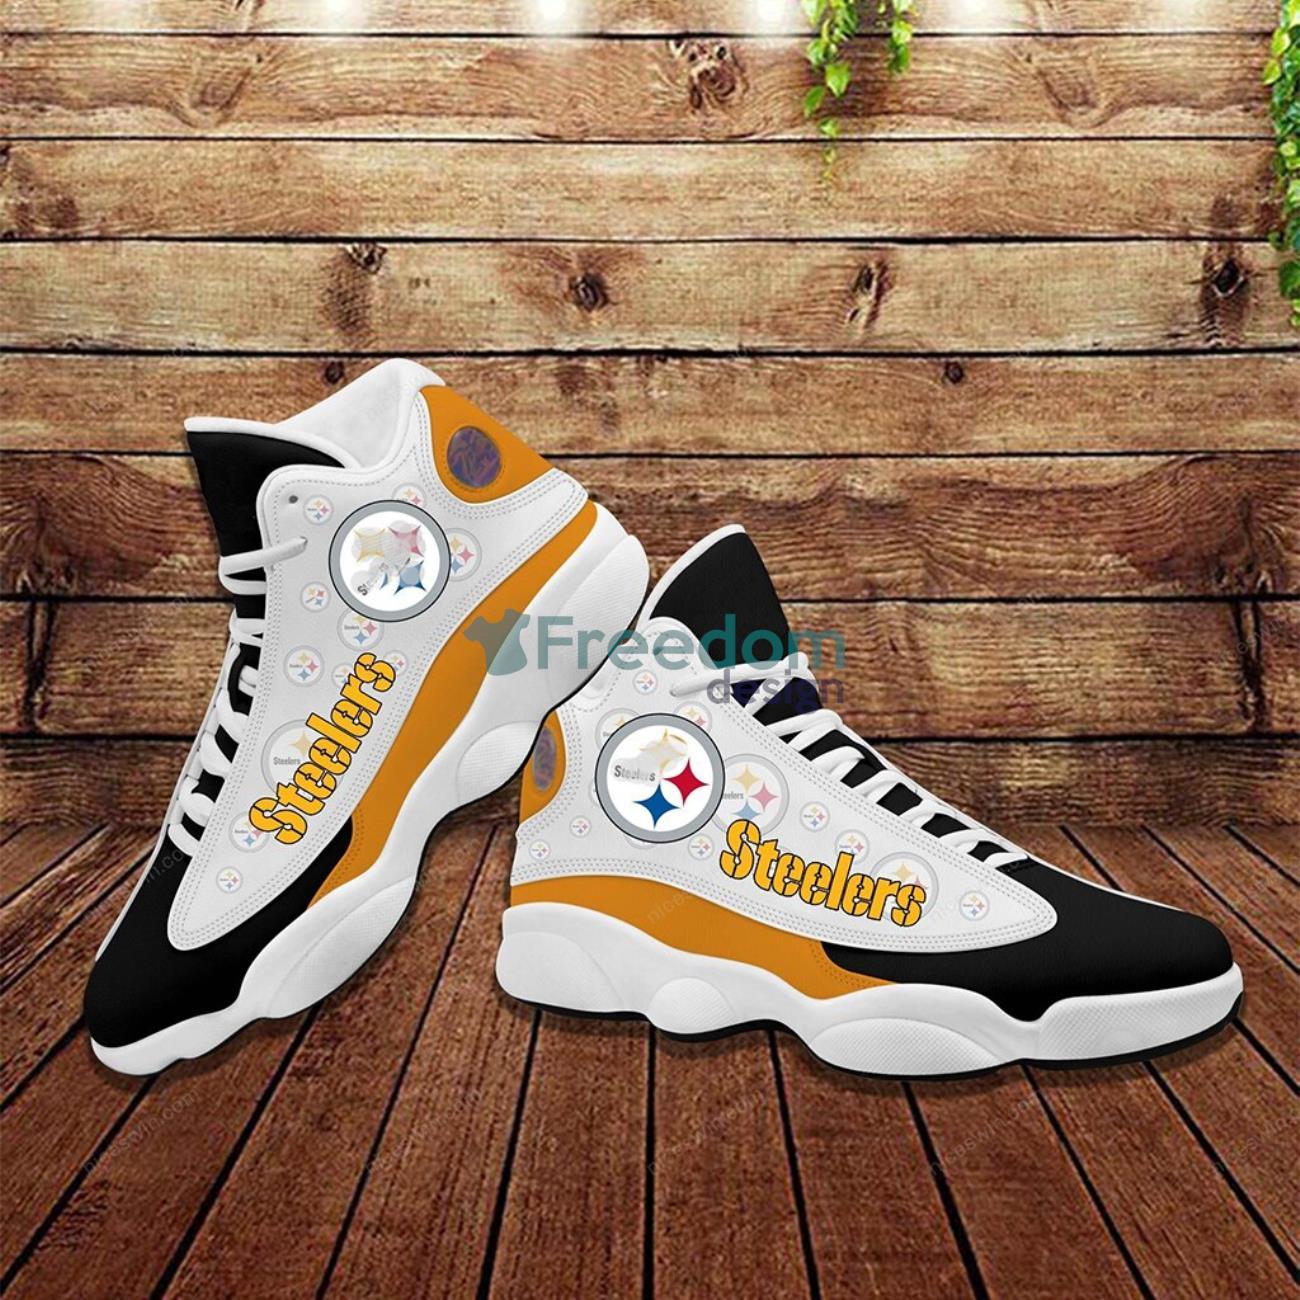 Pittsburgh Steelers Fans Air Jordan 13 Shoes For Fans